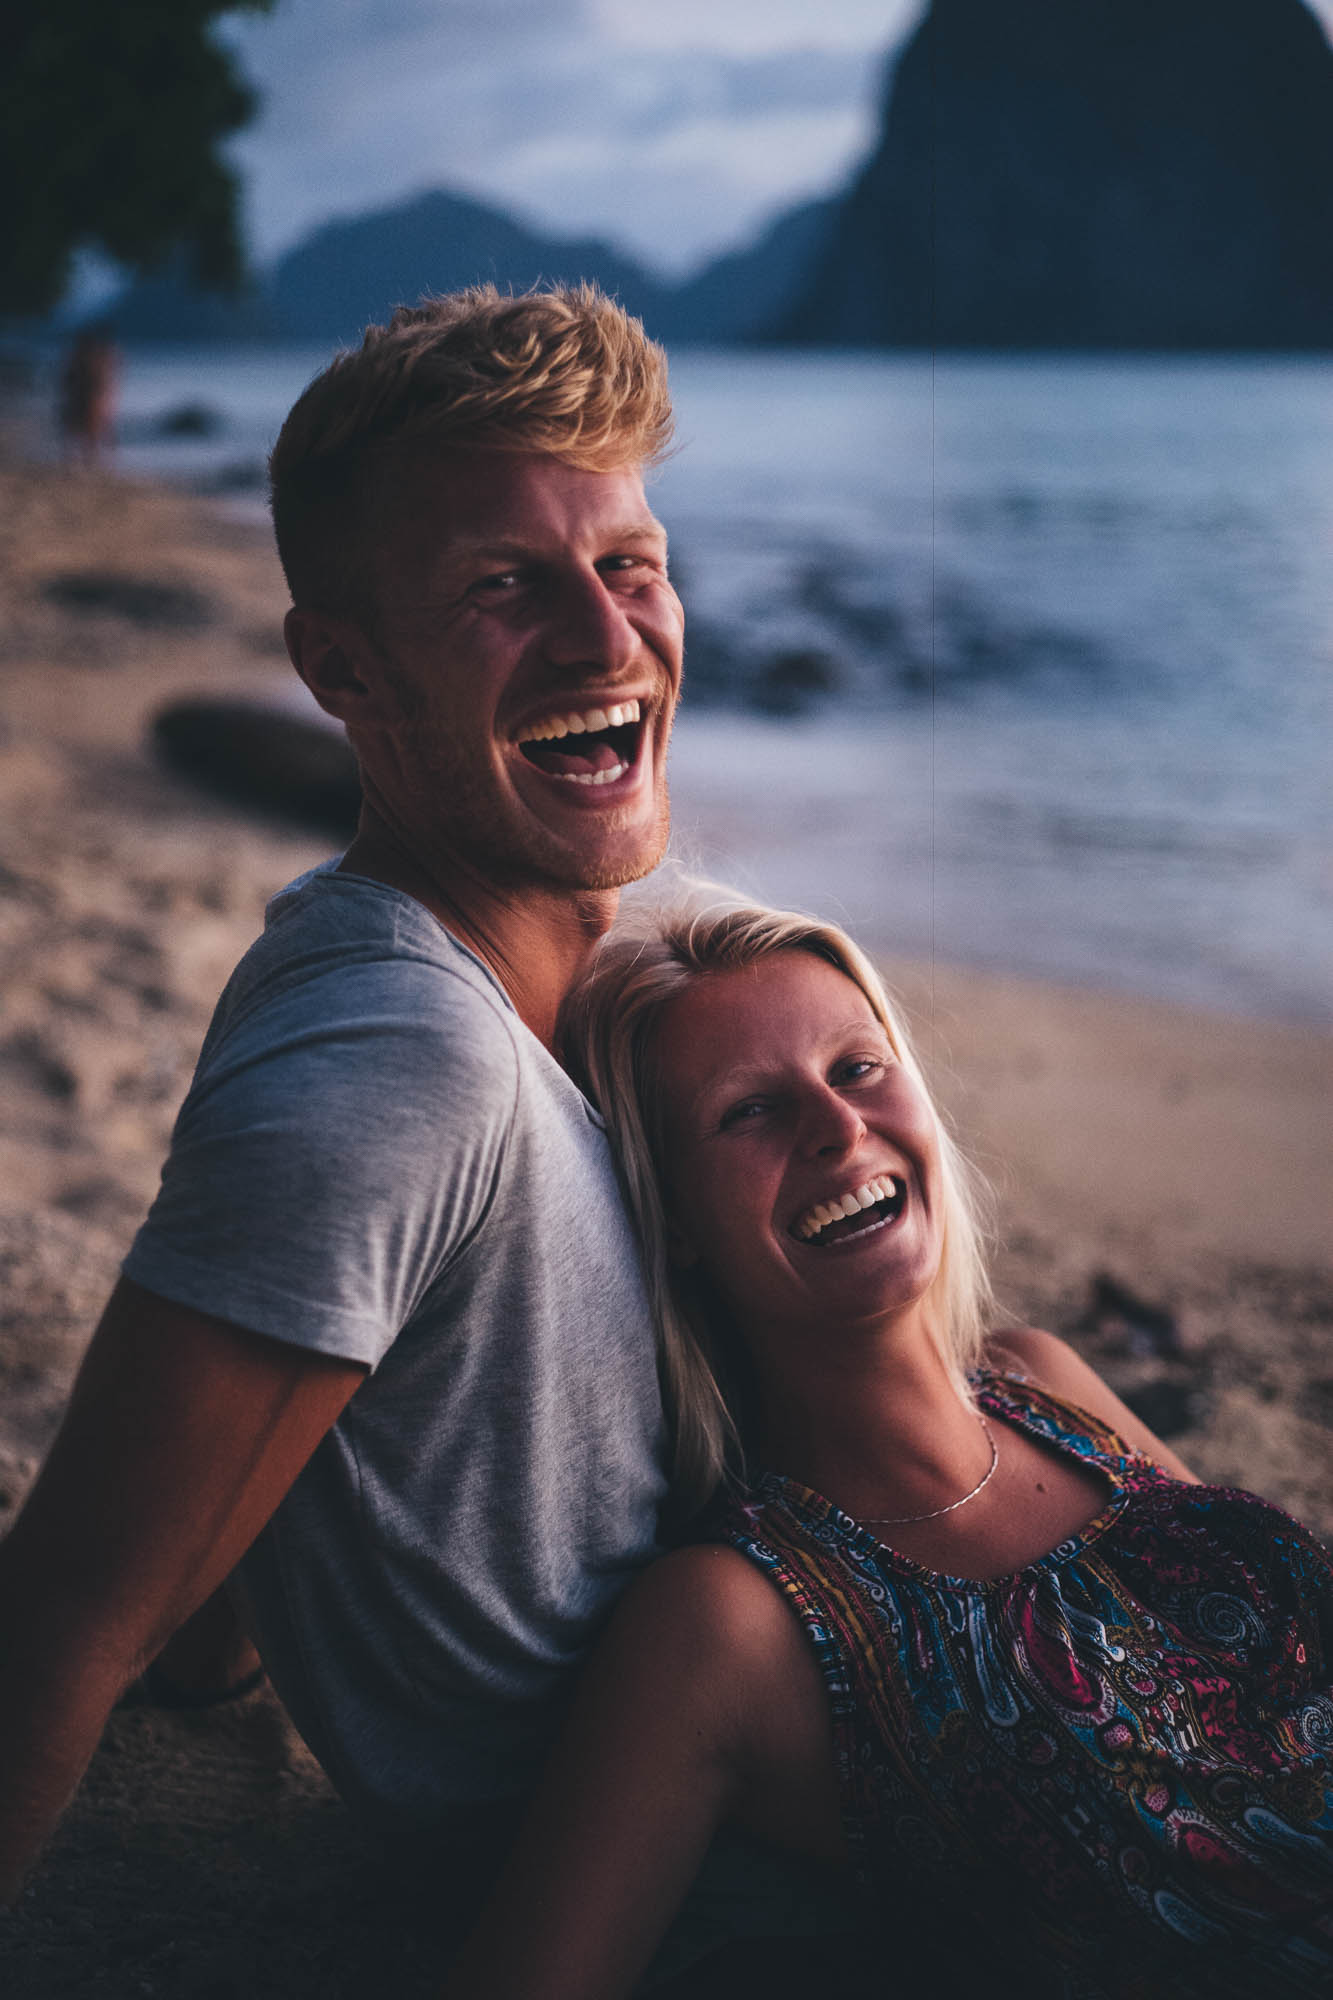 huge smiles on couples faces as they sit together at the beach a sunset